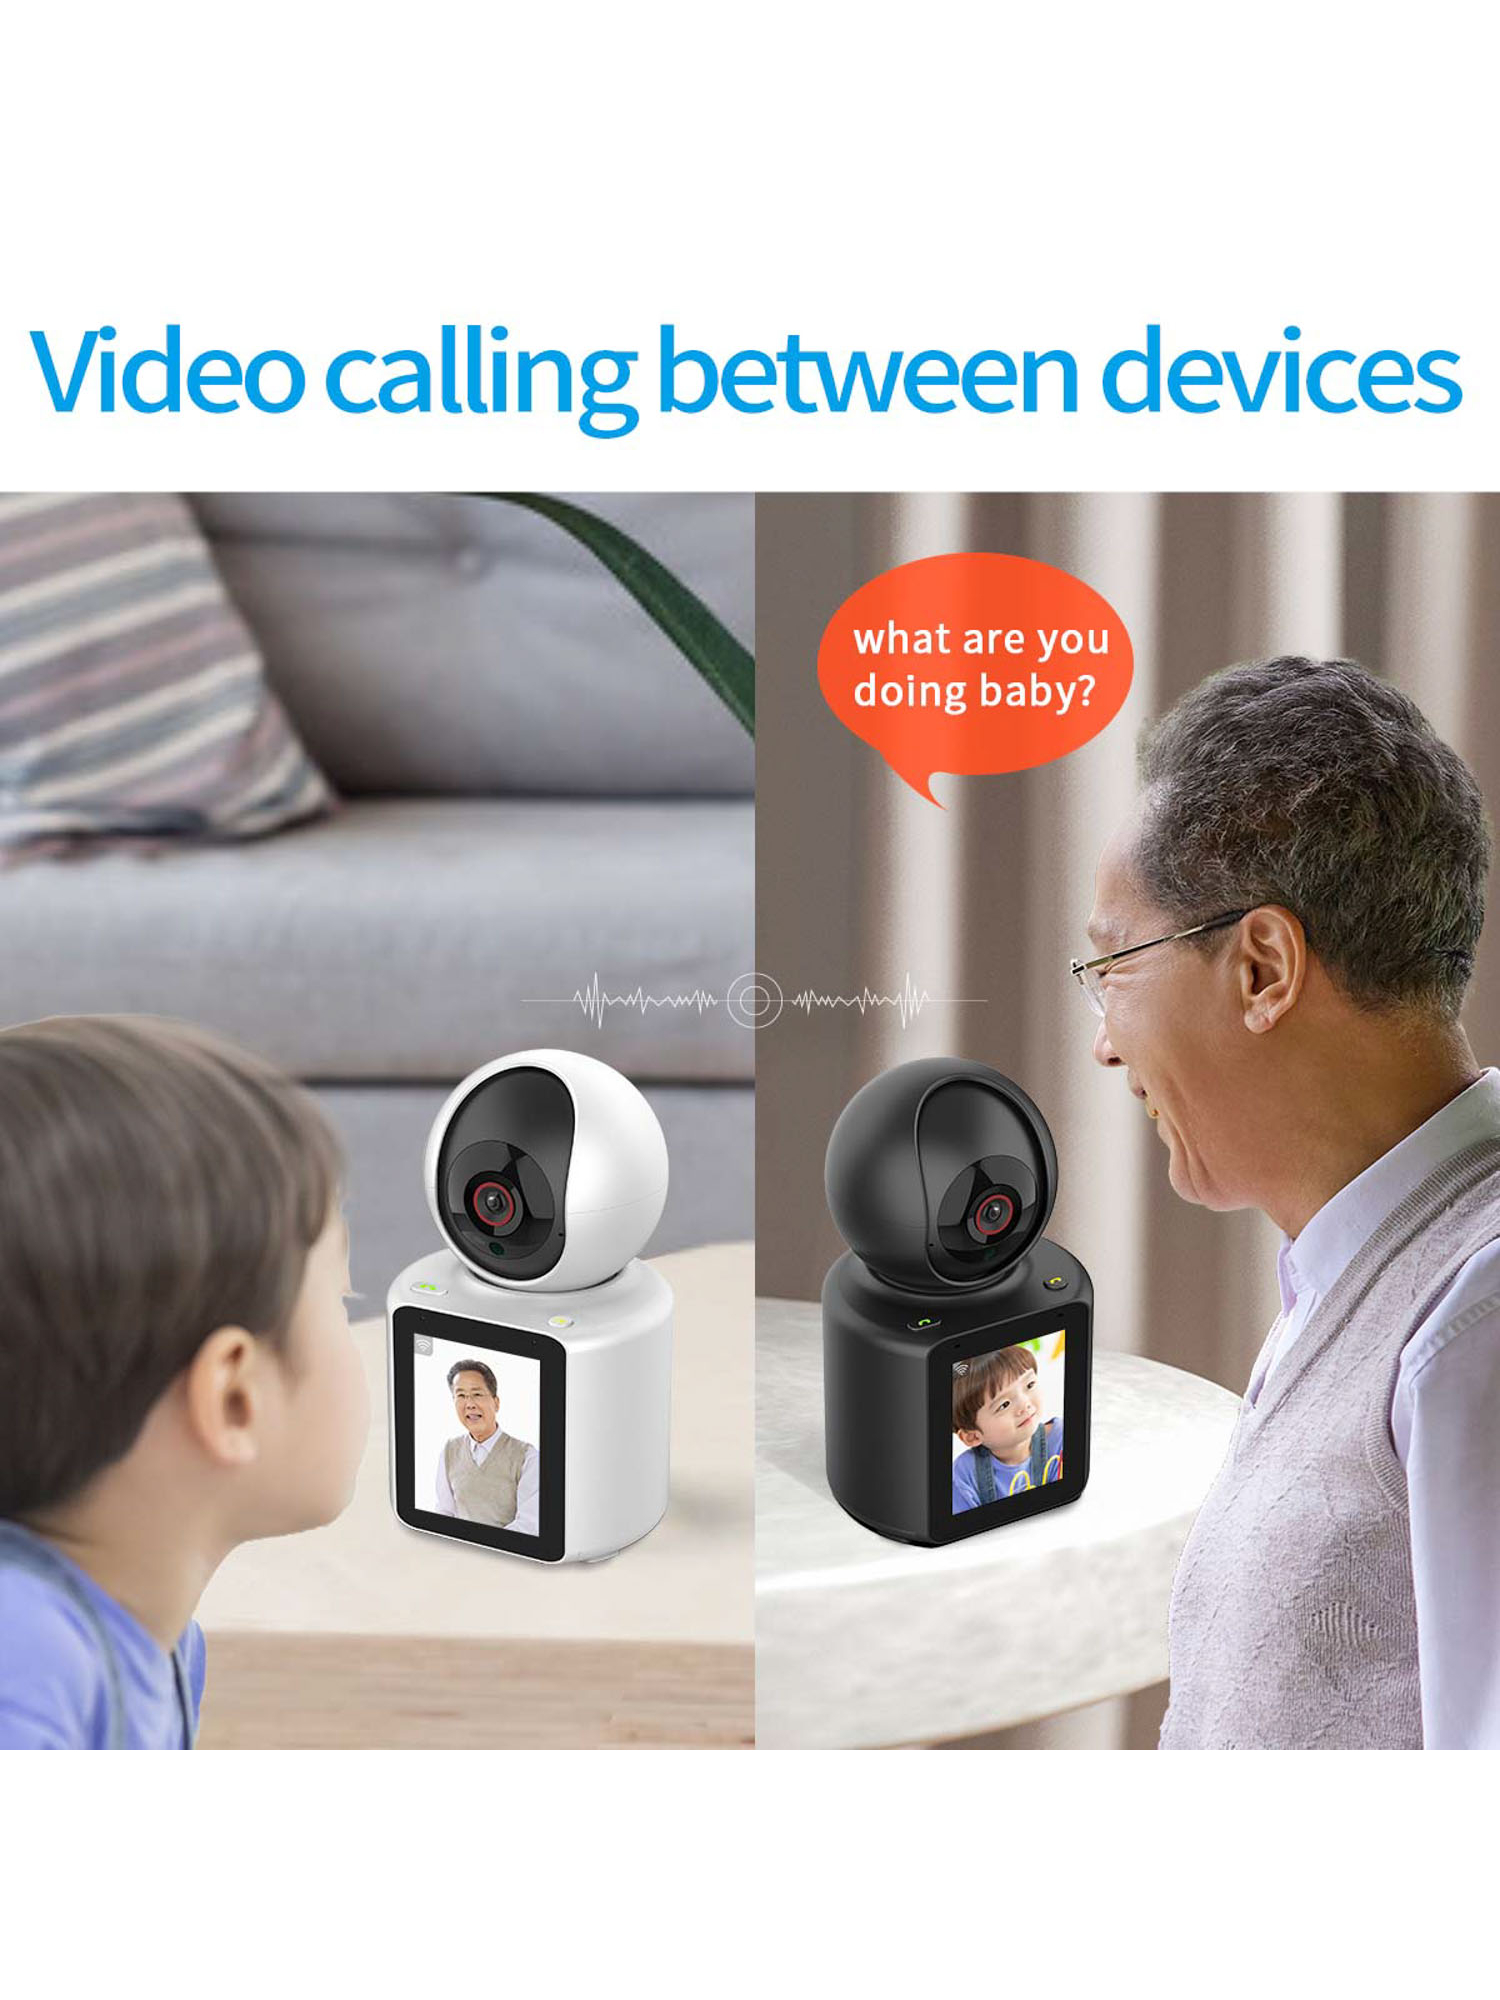 Amuqkark Two-Way Video Call Camera, 2.8-Inch HD Display And Two-Way Video Call Function, Tracking Of Body Movement, Alarm Push